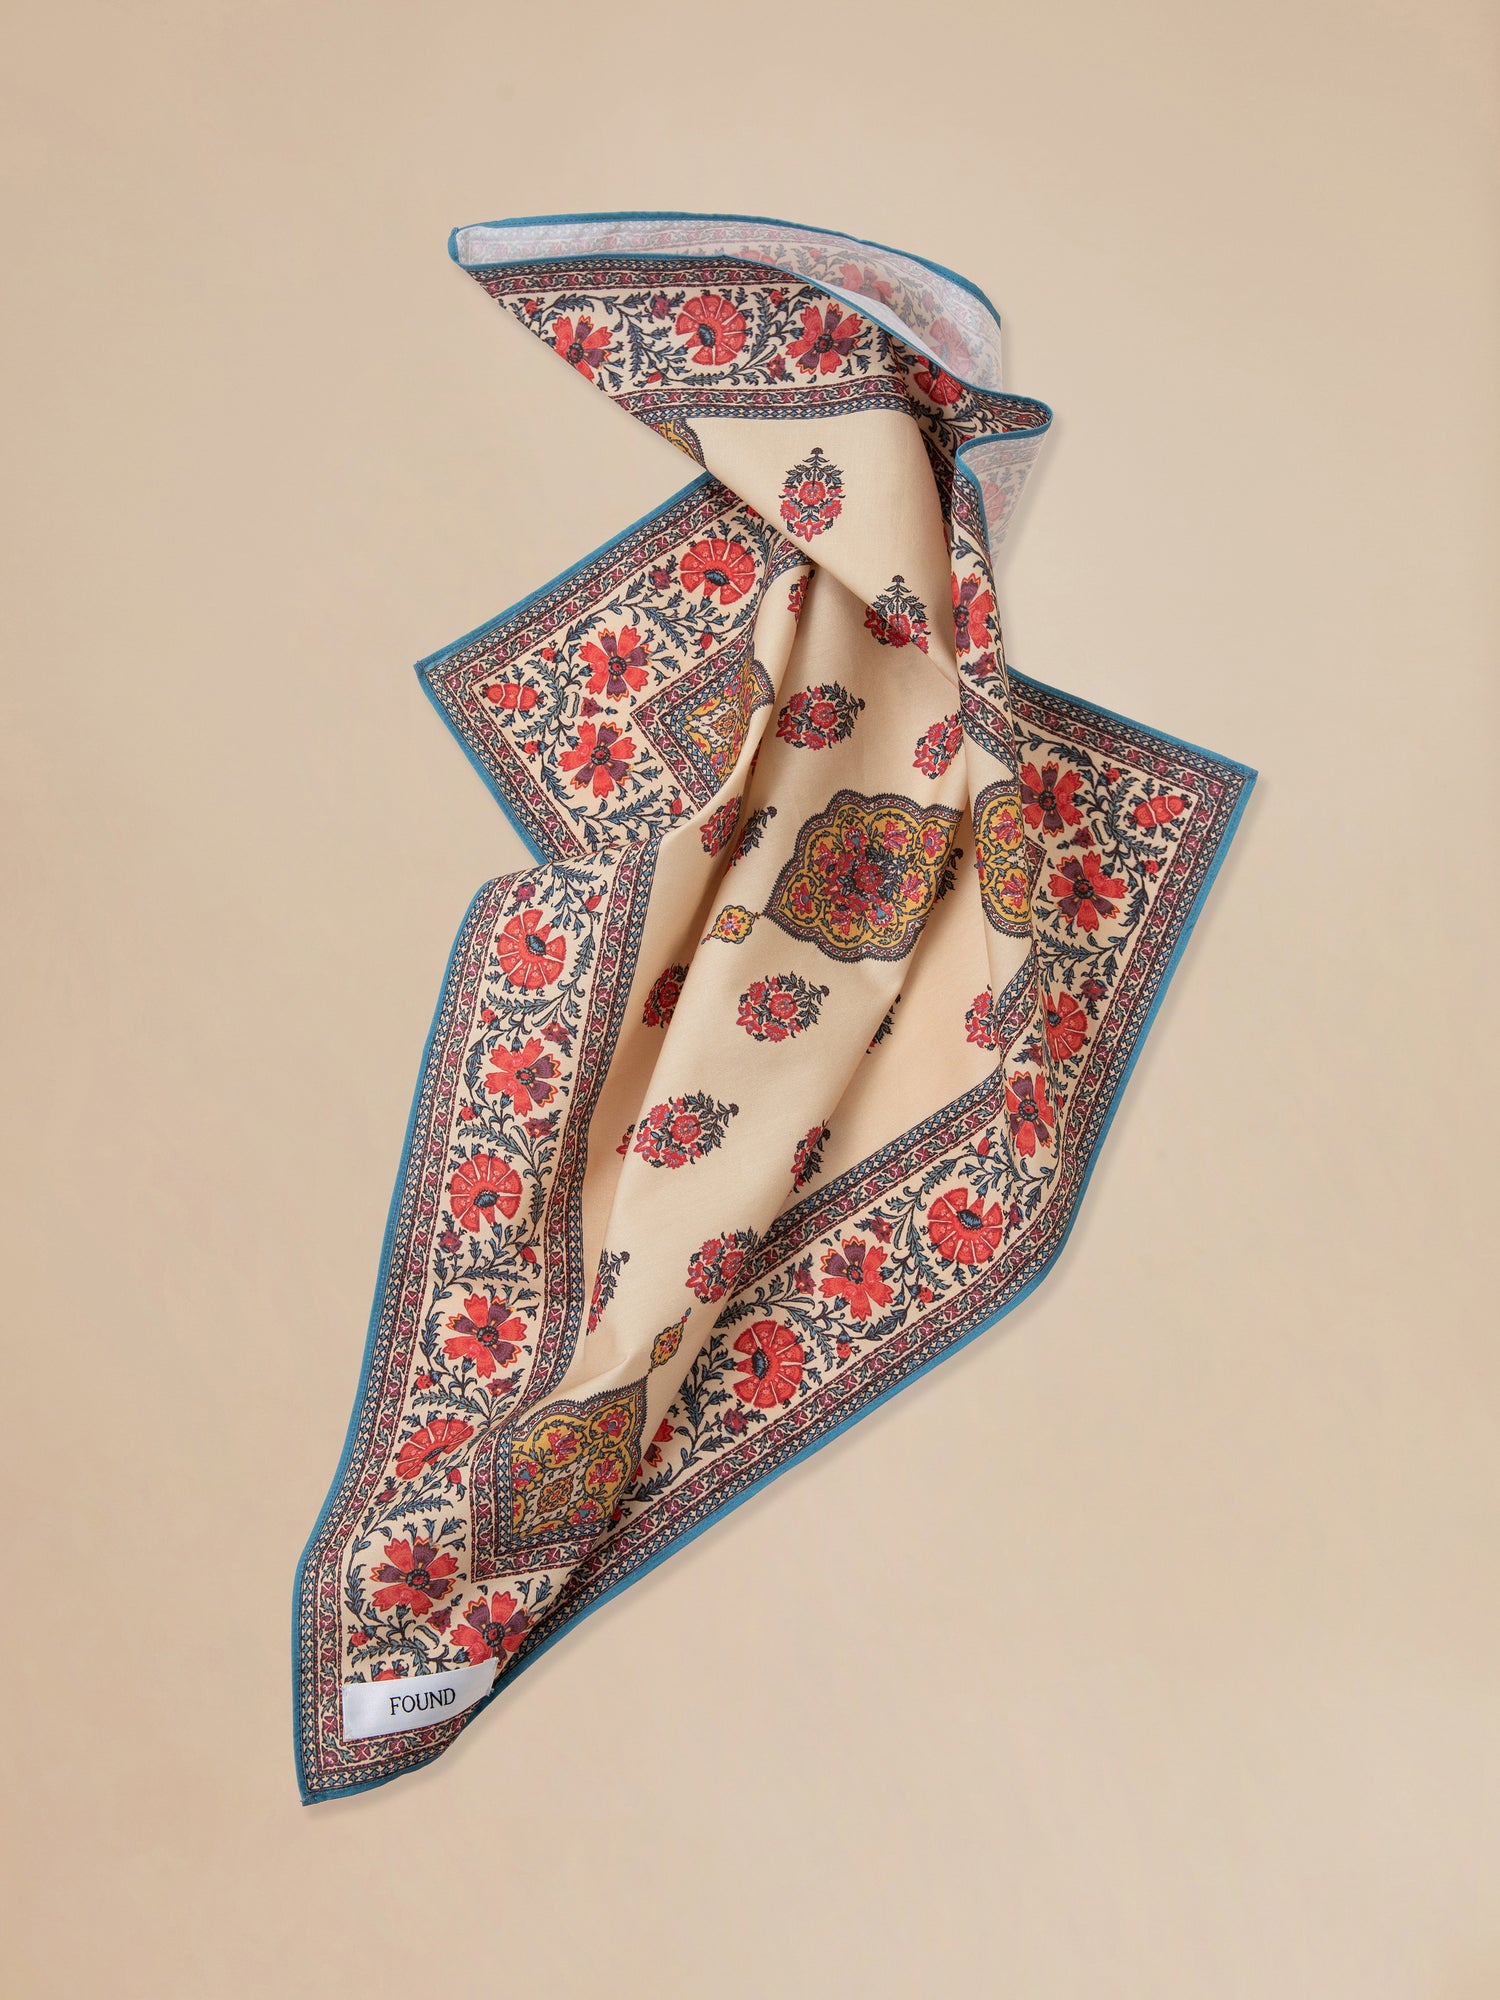 A Found Poinciana Bandana scarf featuring a floral pattern made with airy cotton blend.